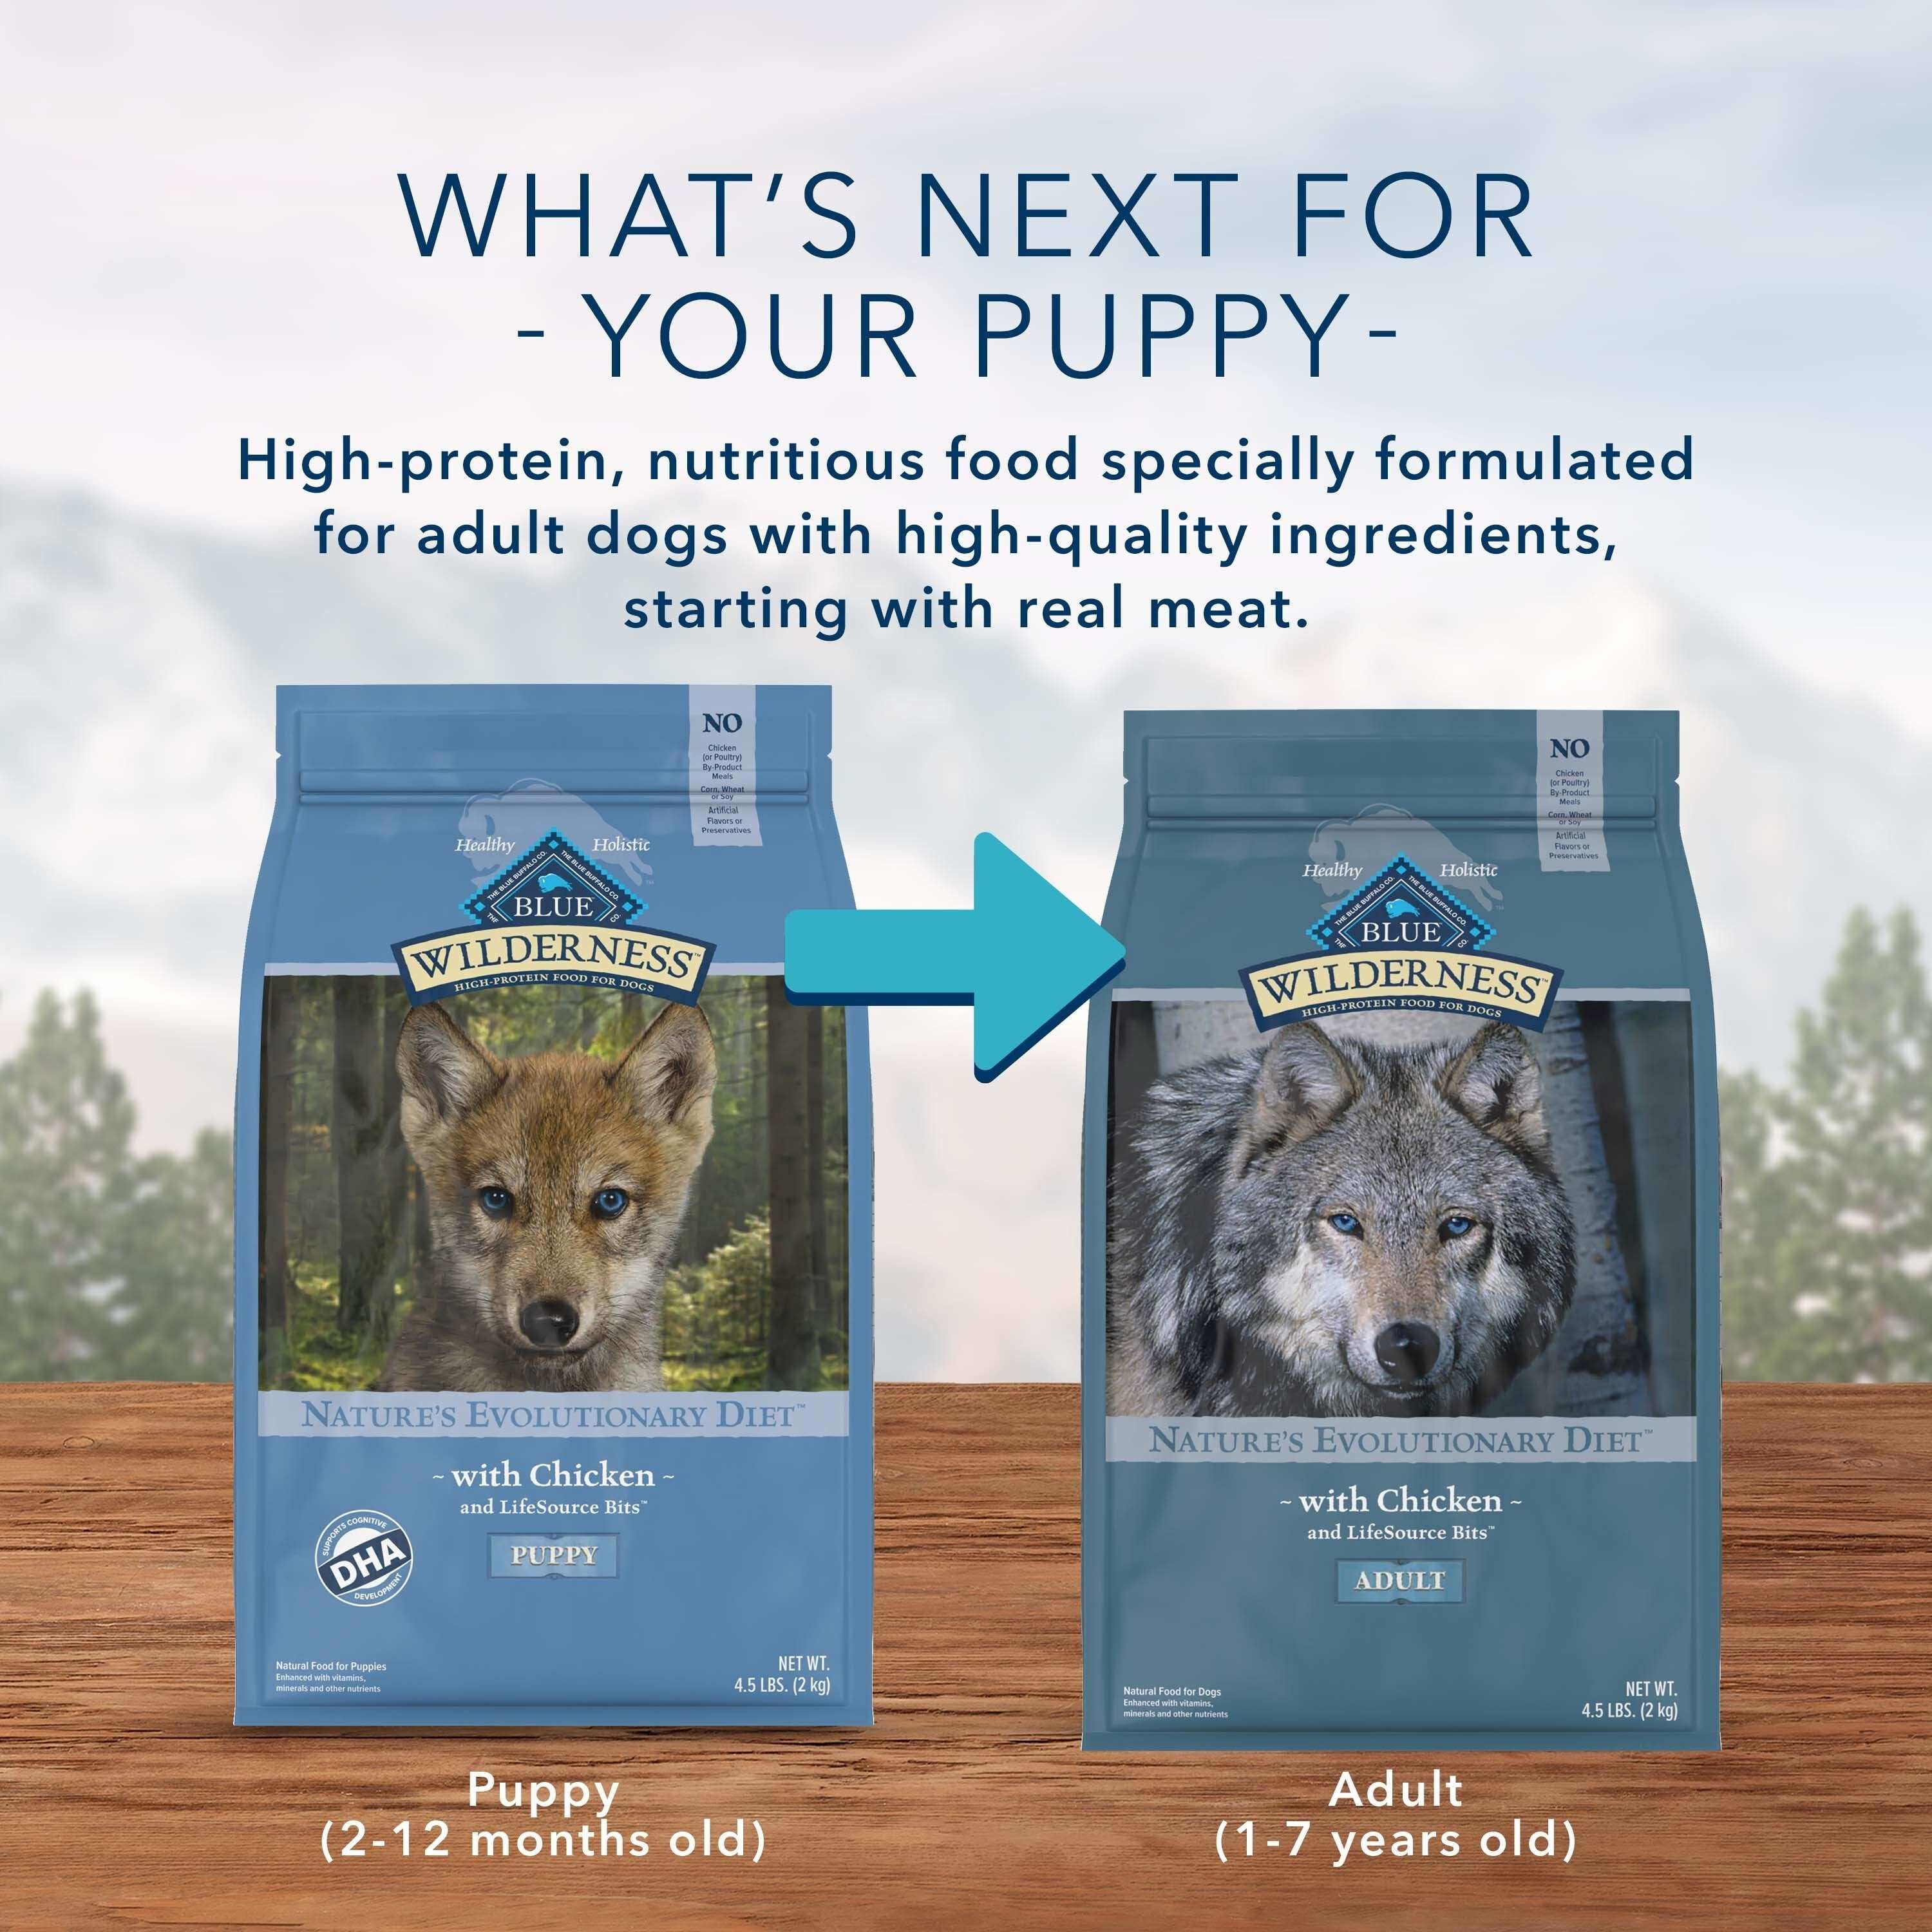 Wholesale prices with free shipping all over United States Blue Buffalo Wilderness High Protein Chicken Dry Dog Food for Puppies, Grain-Free, 4.5 lb. Bag - Steven Deals